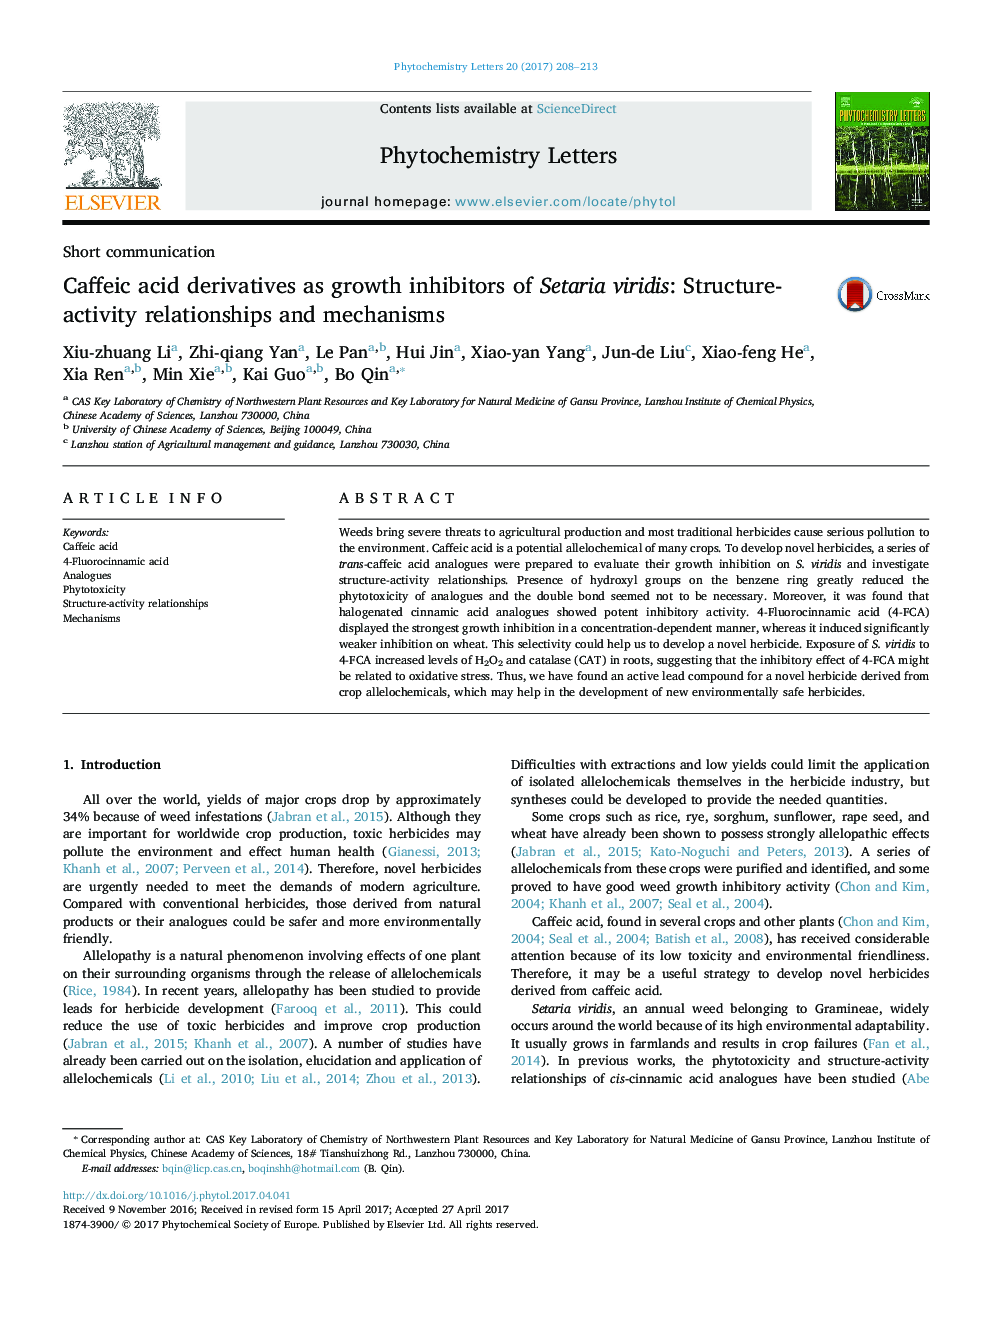 Caffeic acid derivatives as growth inhibitors of Setaria viridis: Structure-activity relationships and mechanisms